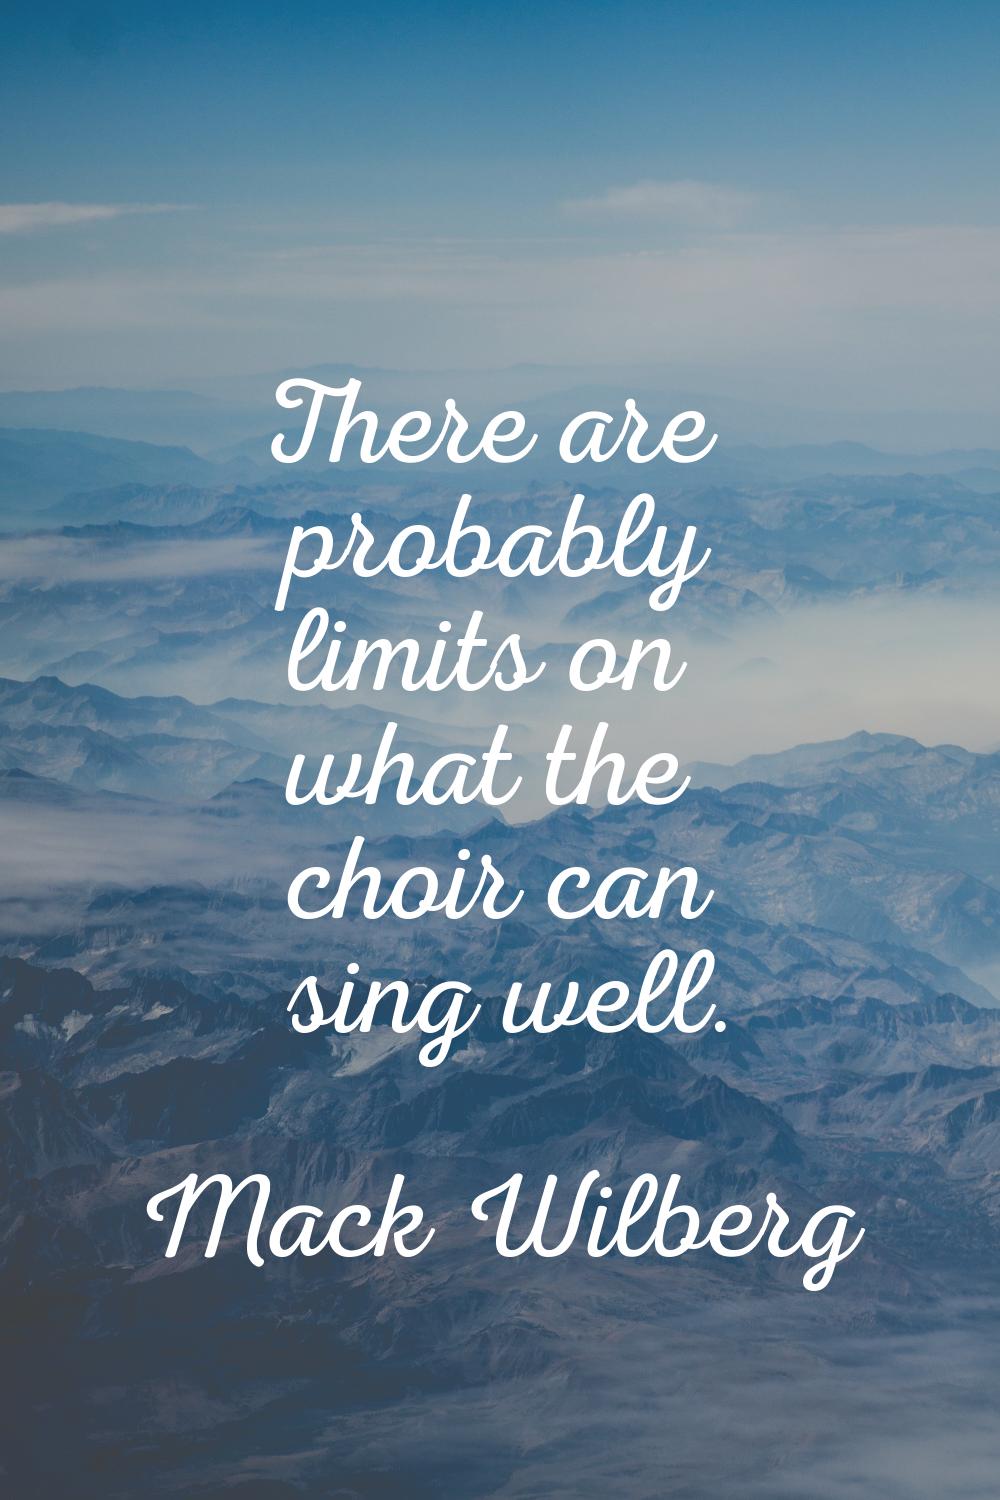 There are probably limits on what the choir can sing well.